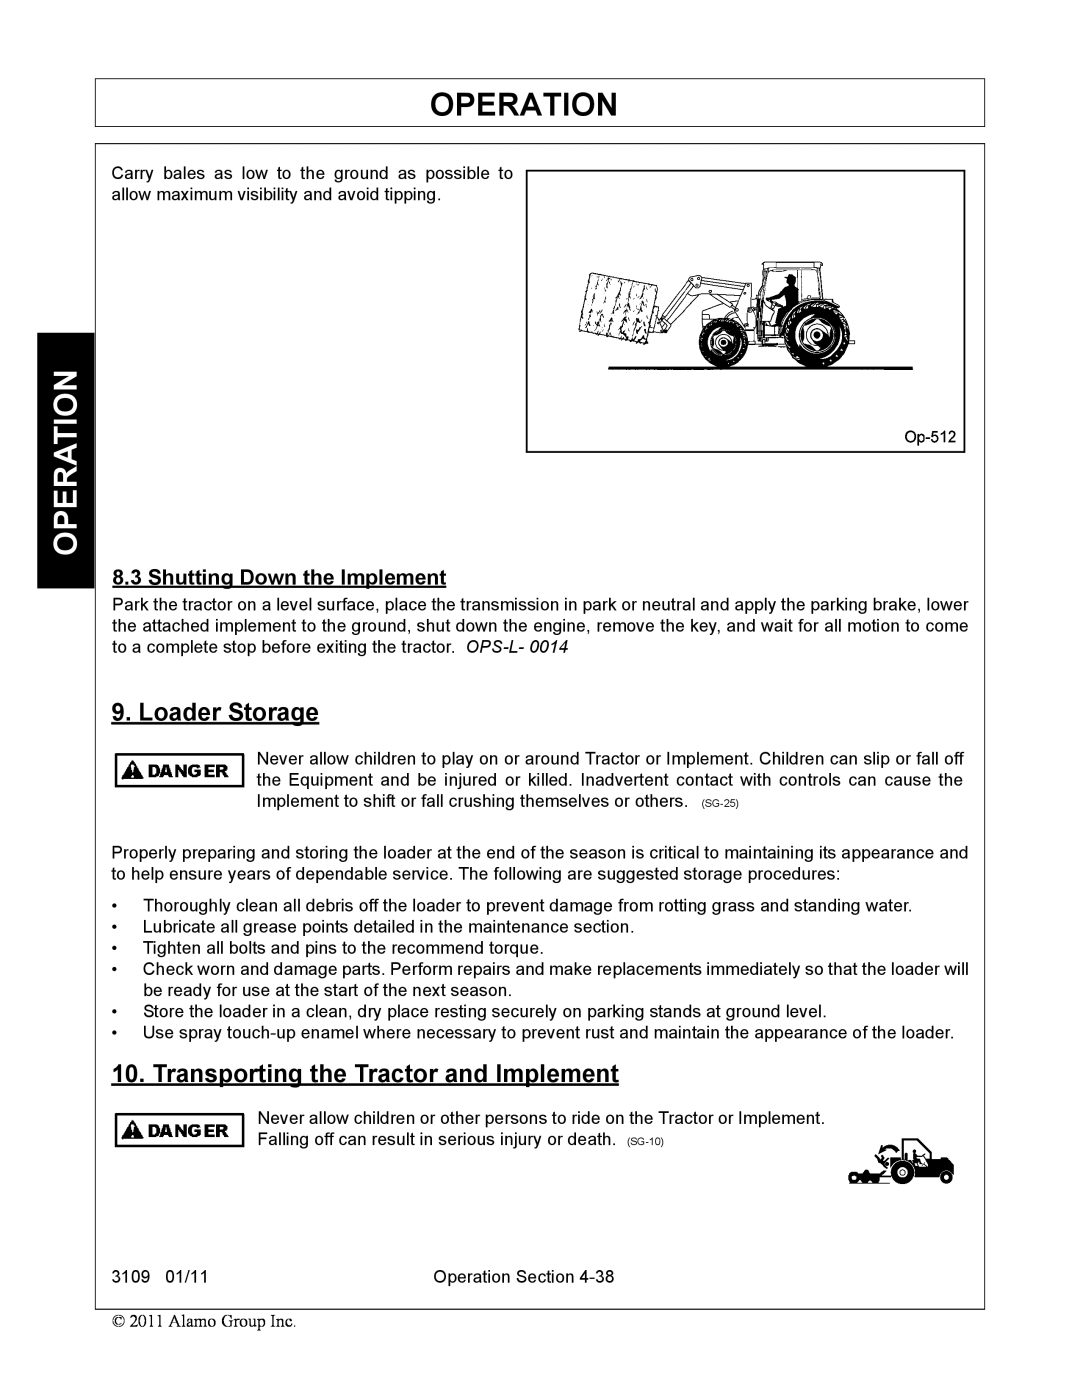 Alamo 3109 manual Operation, Loader Storage, Transporting the Tractor and Implement, Shutting Down the Implement 